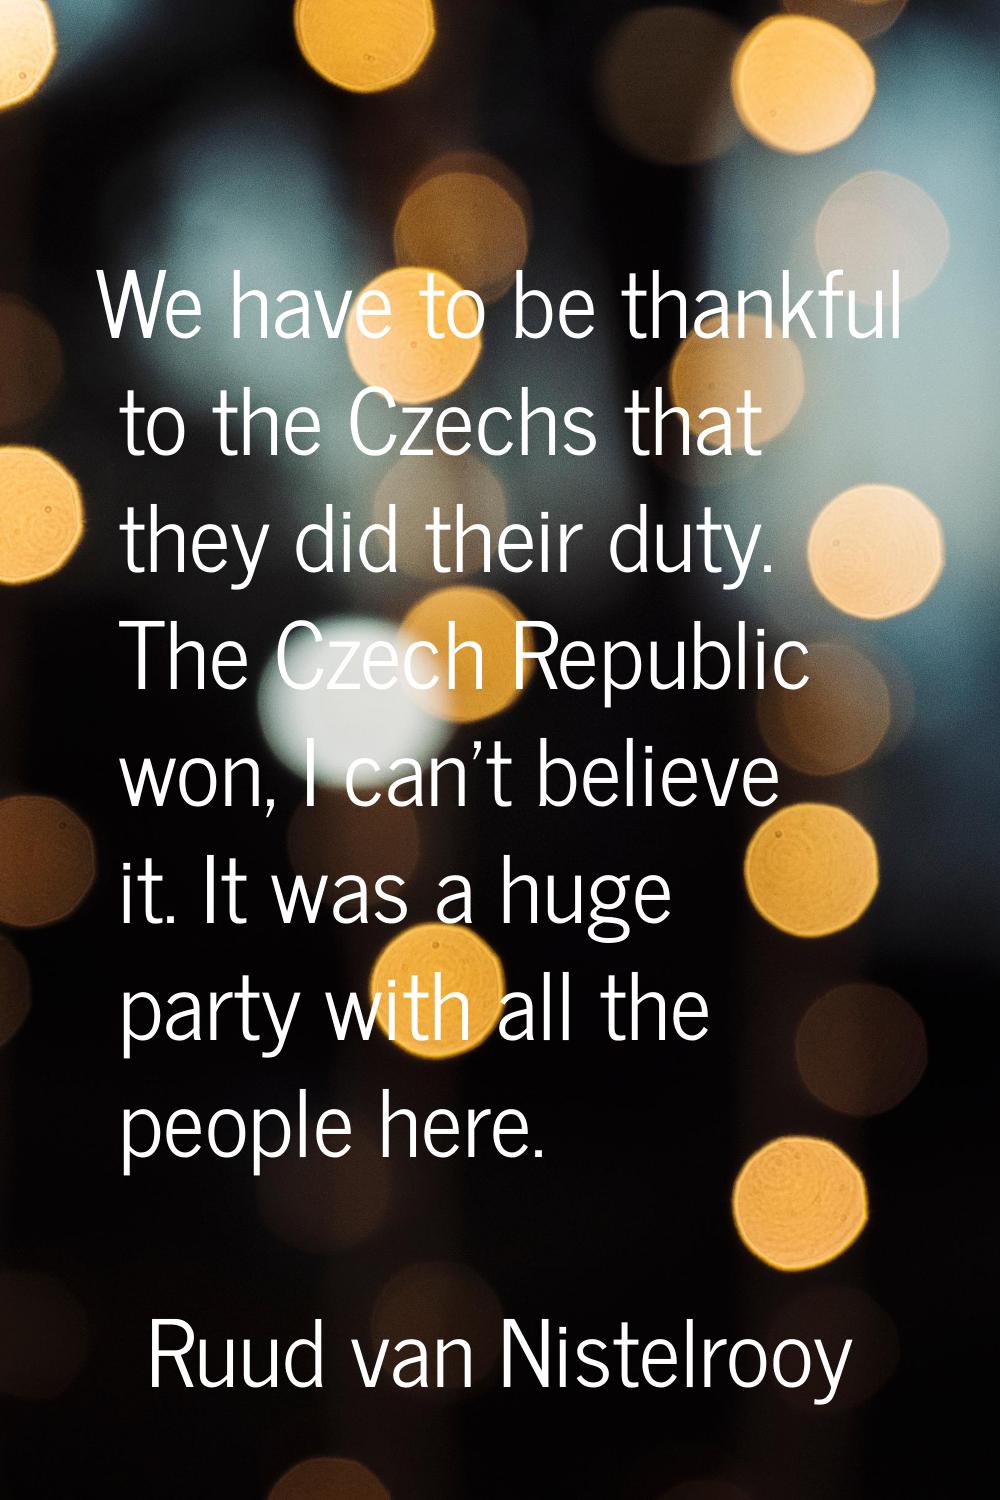 We have to be thankful to the Czechs that they did their duty. The Czech Republic won, I can't beli